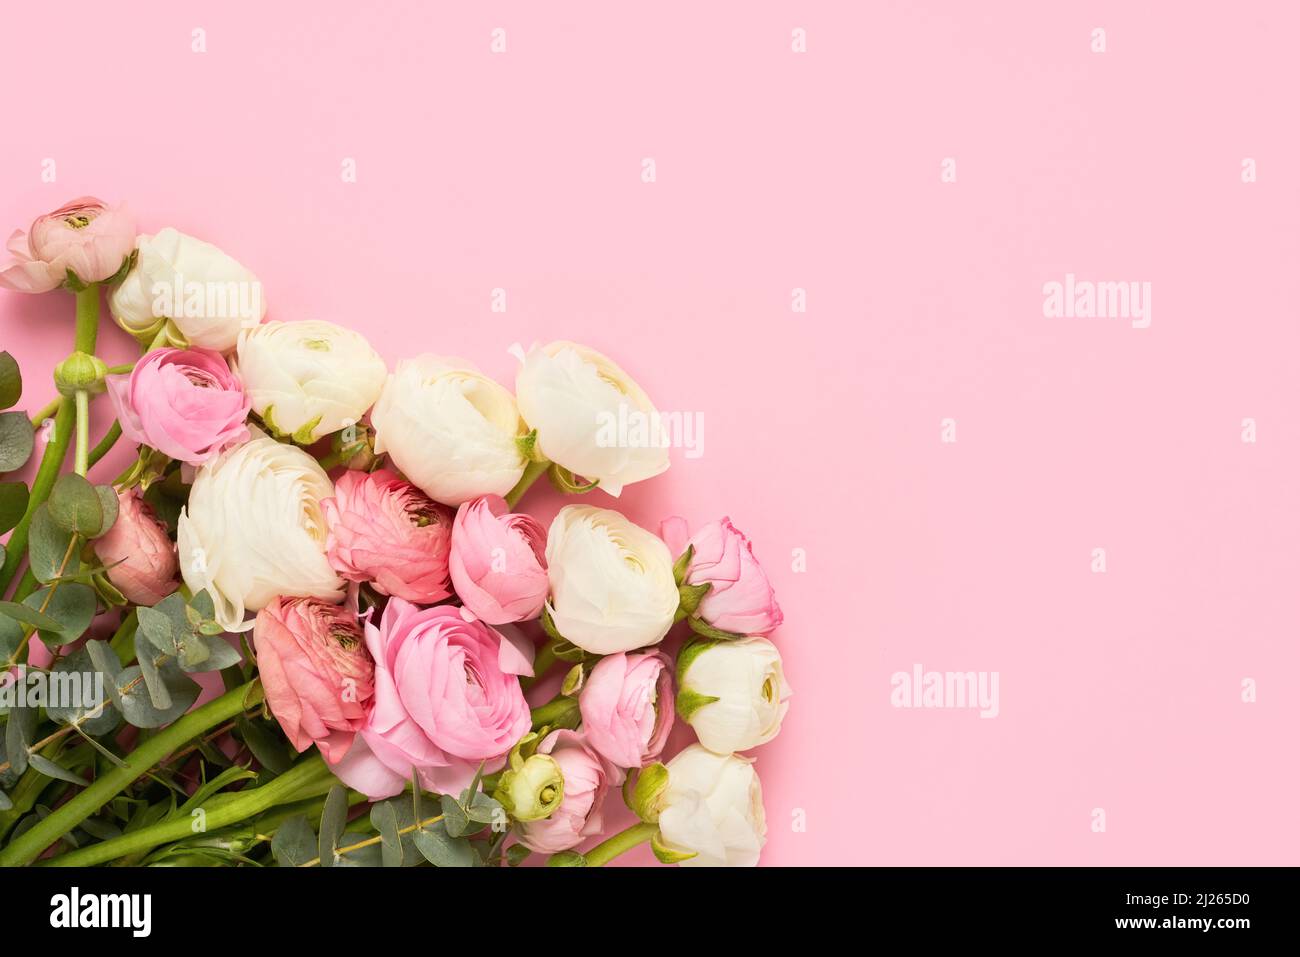 Bunch of beautiful ranunculus flowers on a pink background. Mothers Day, Valentines Day, birthday concept. Top view, copy space for text Stock Photo